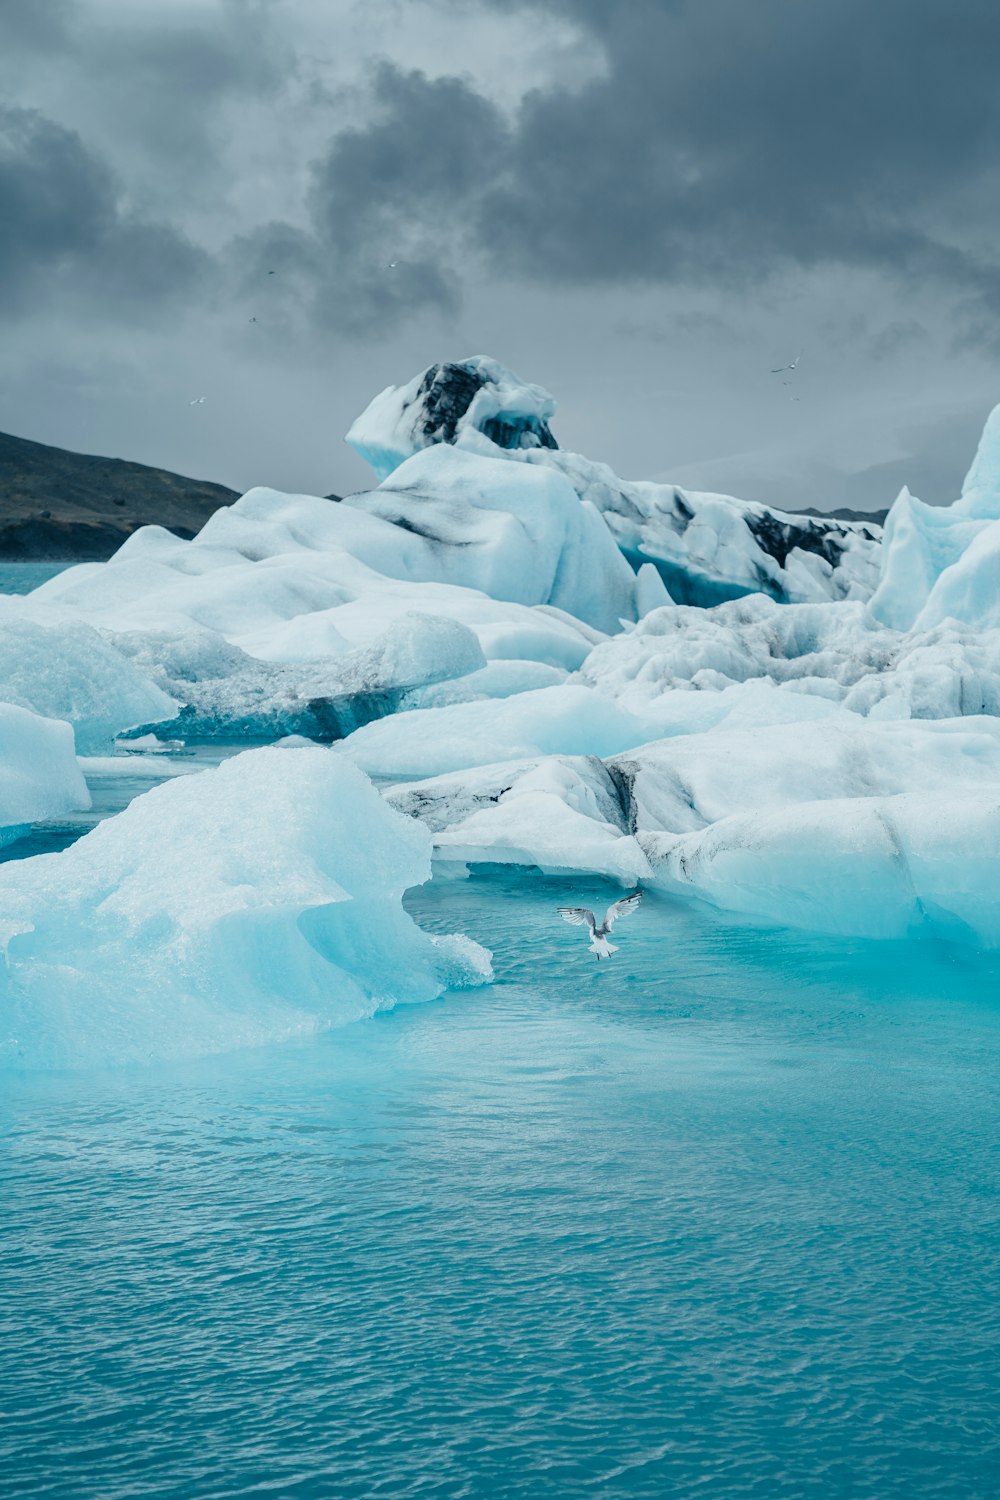 a body of water surrounded by icebergs under a cloudy sky